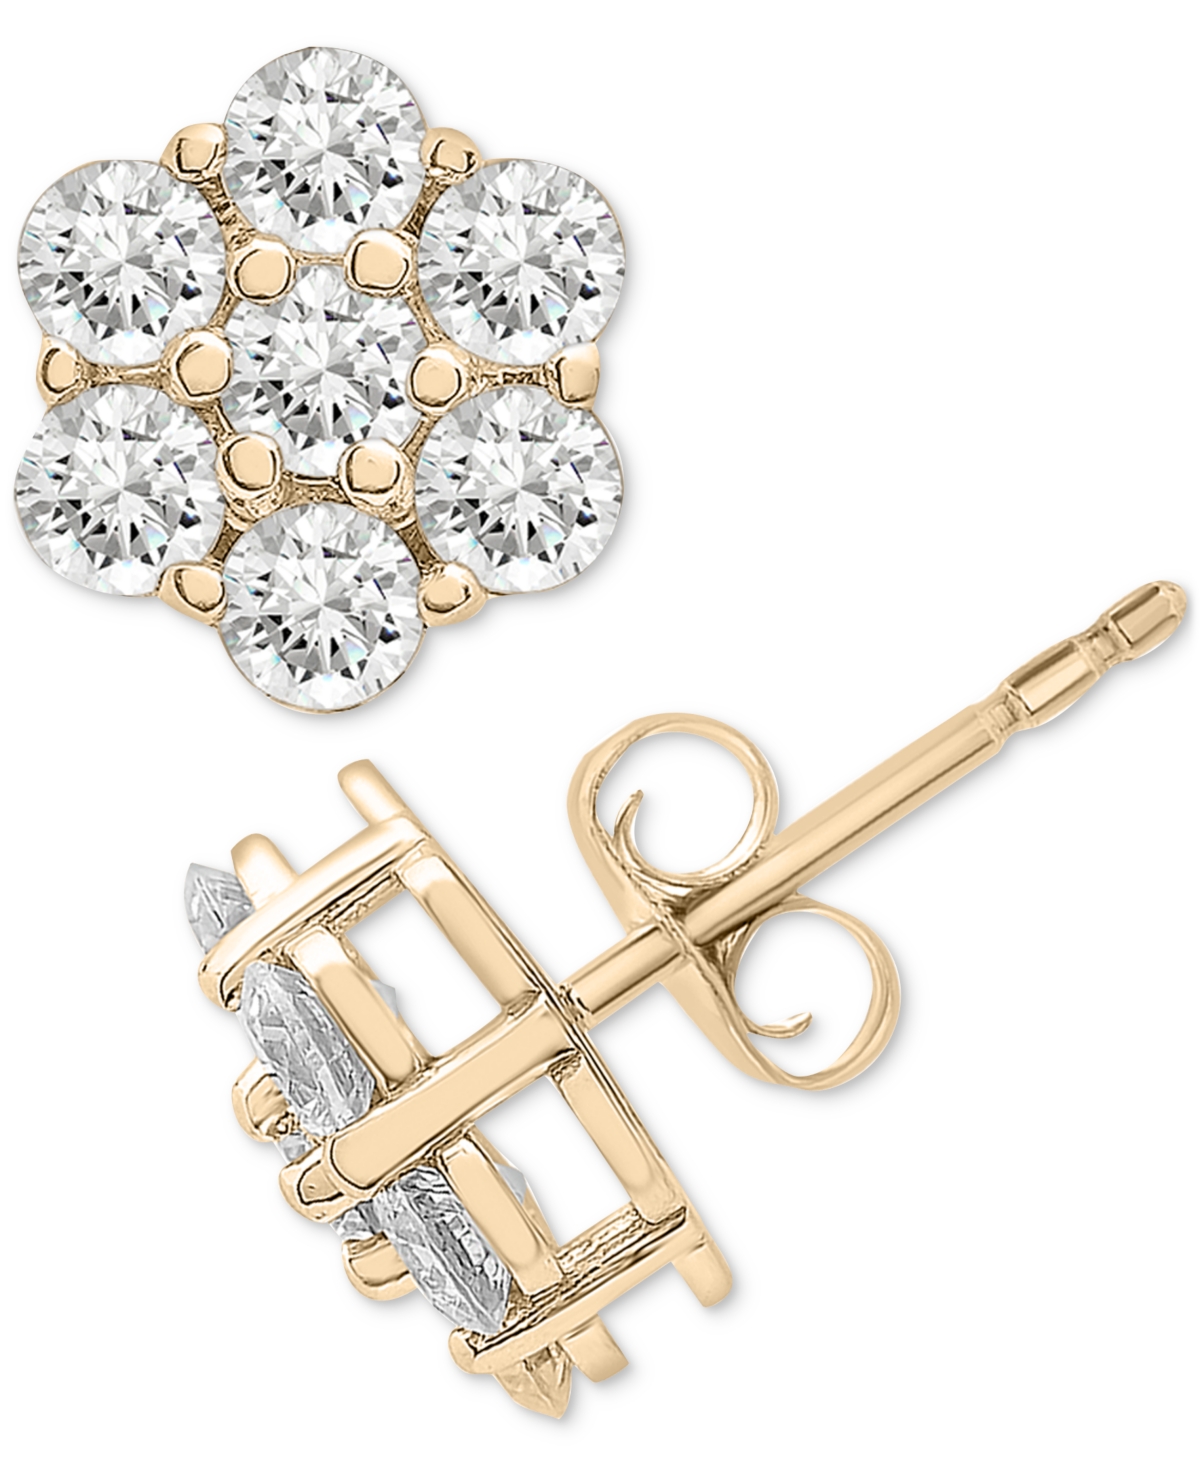 Diamond Cluster Stud Earrings (1-1/2 ct. tw) in 14k Gold, Created for Macy's - Yellow Gold